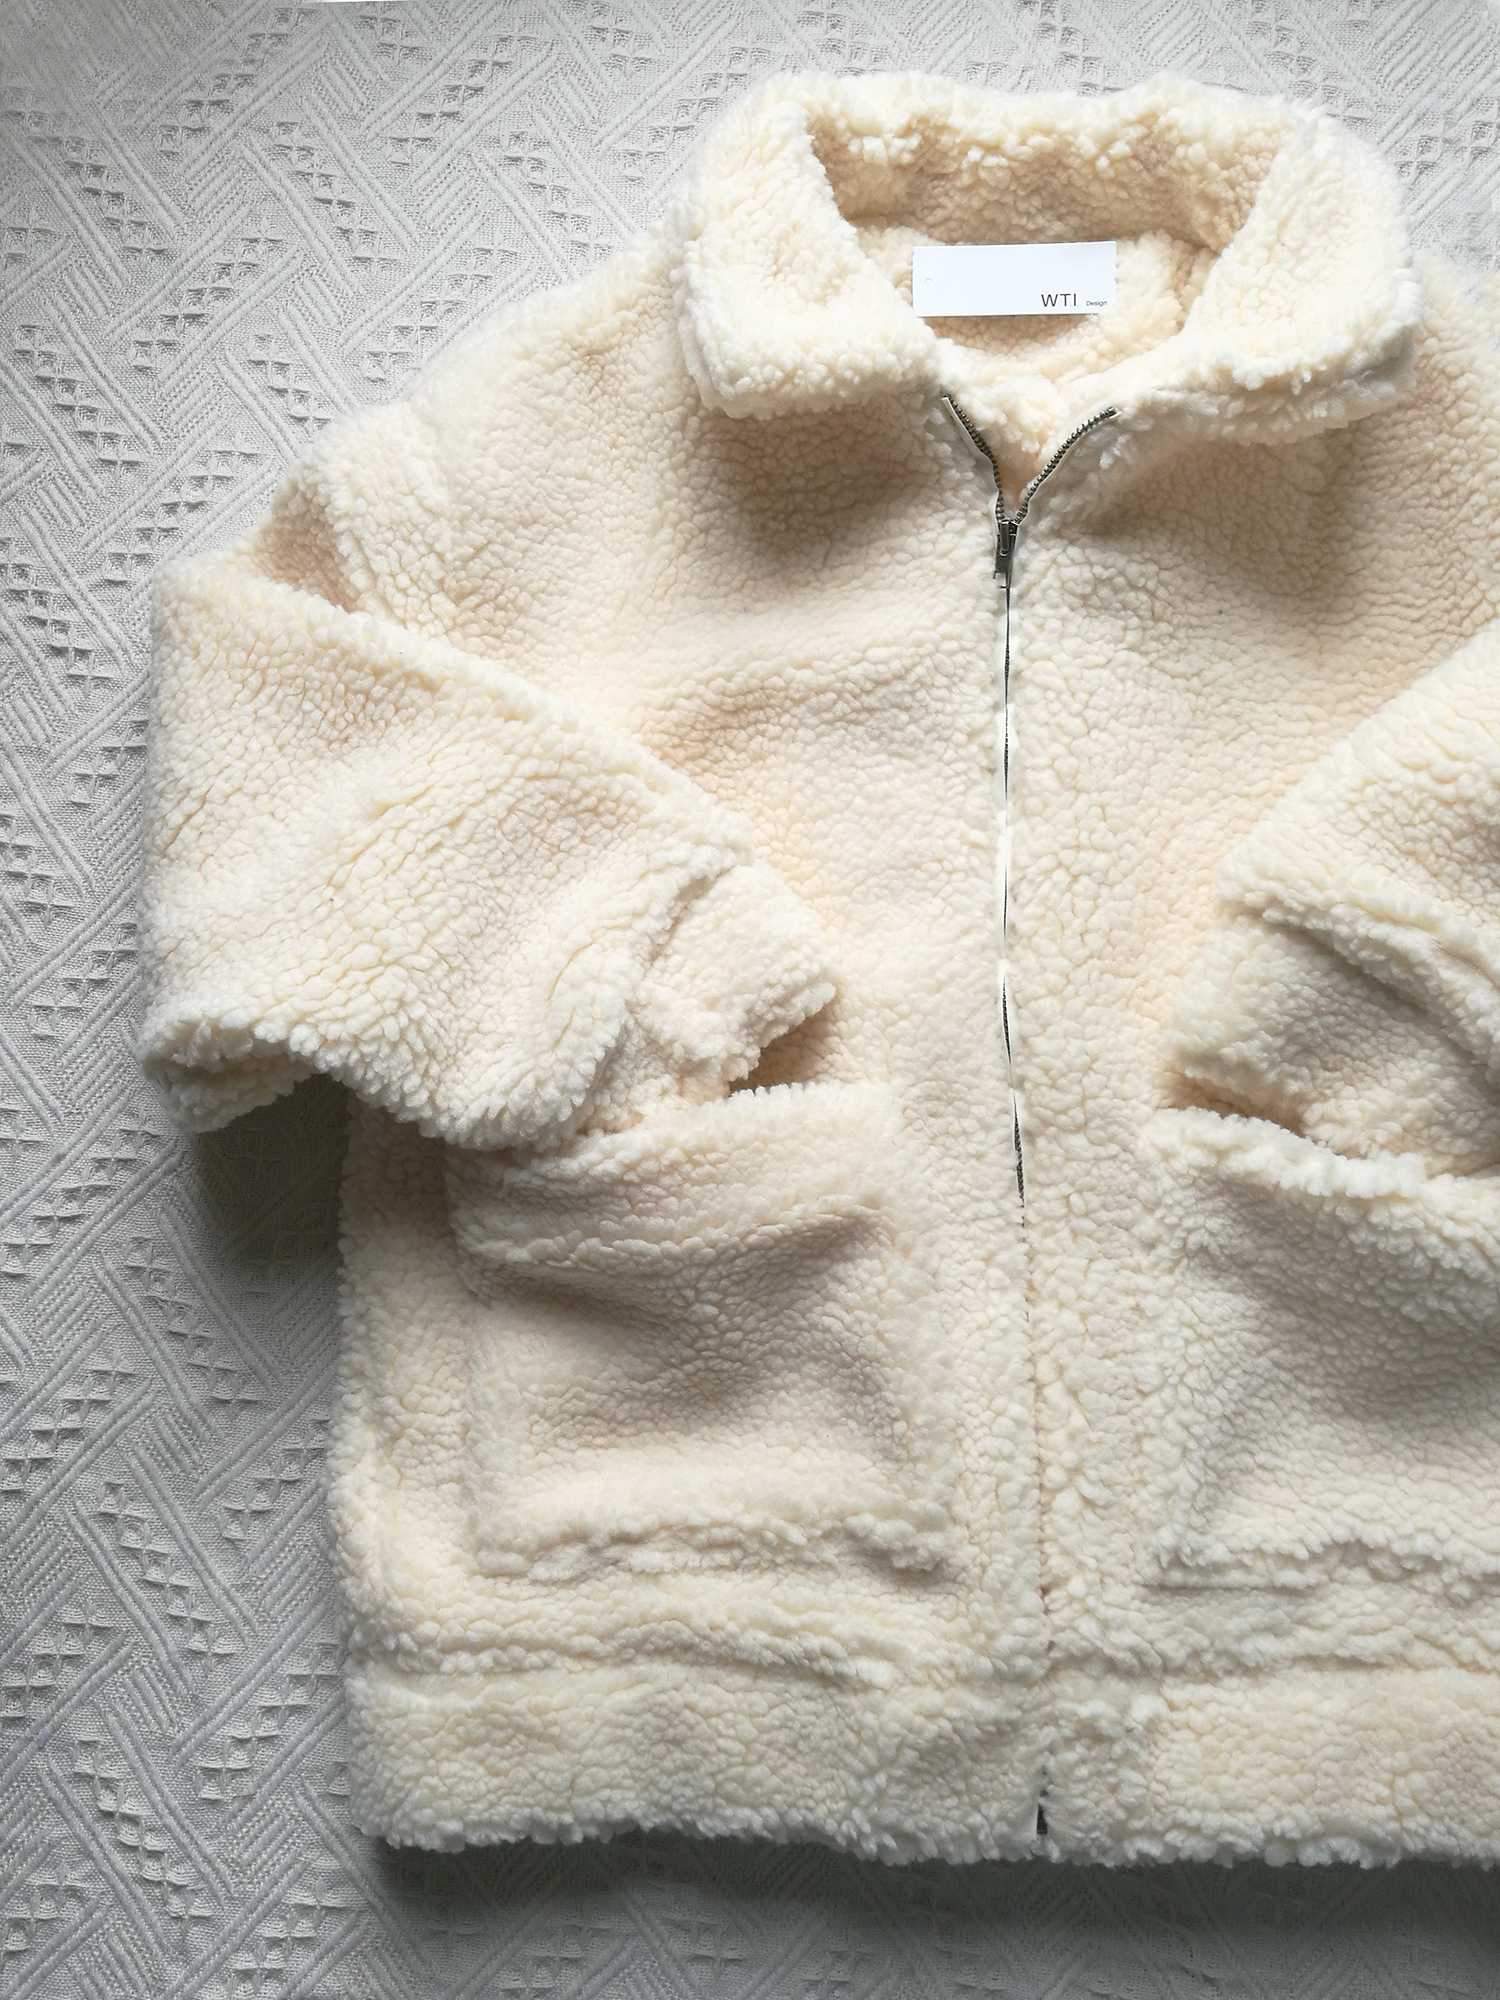 Teddy Bear Coat ::Get The Best Teddy Jackets To Keep You Cozy All ...